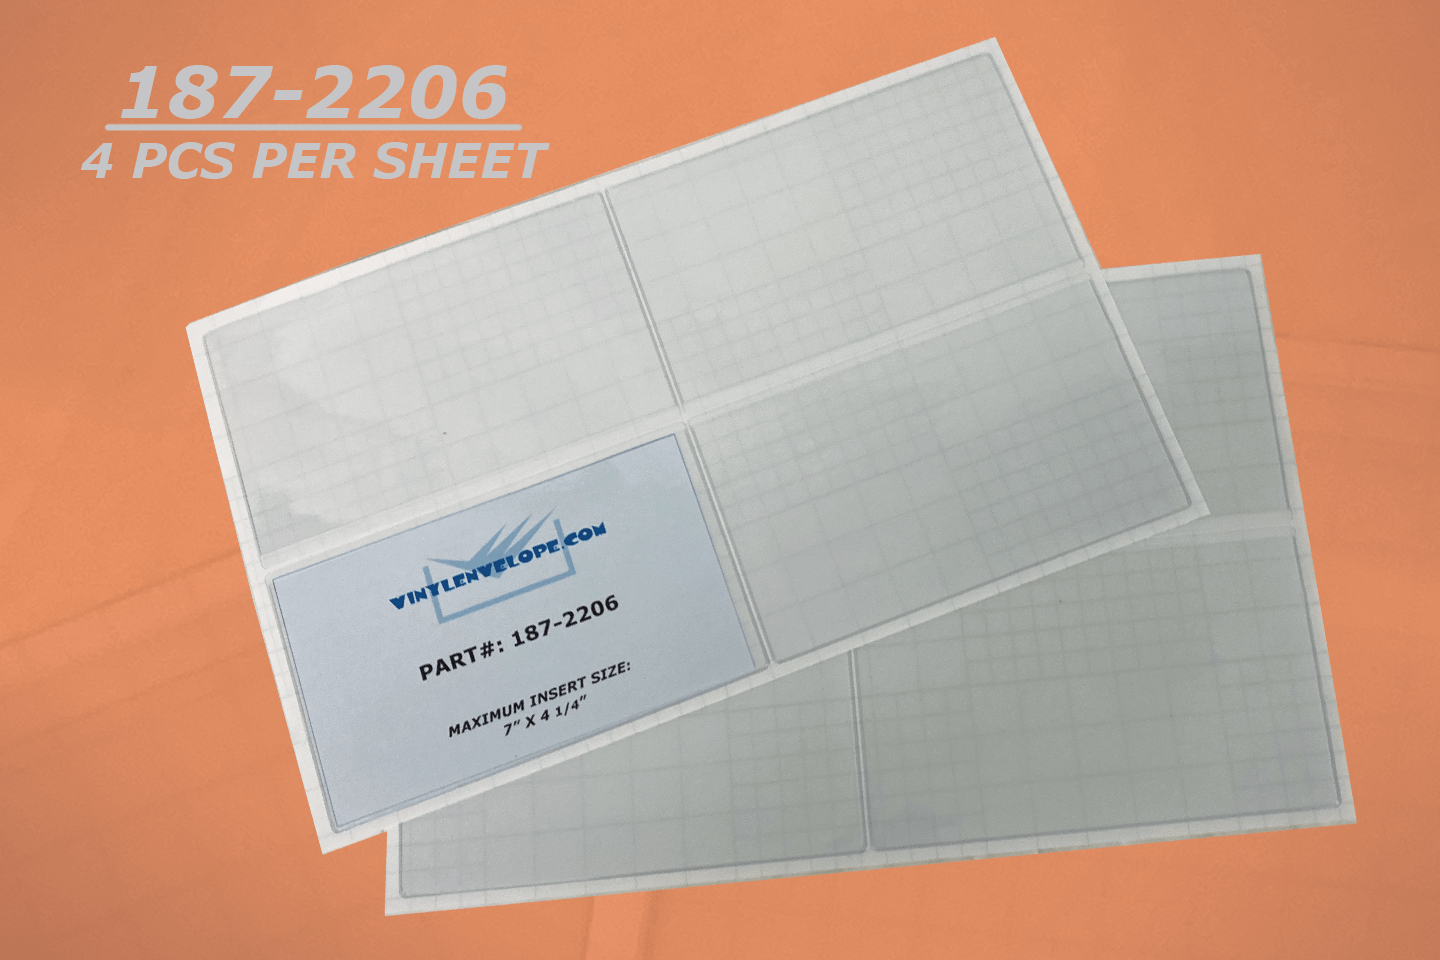 7 3/8" X 4 1/2" Removable Adhesive Pouch